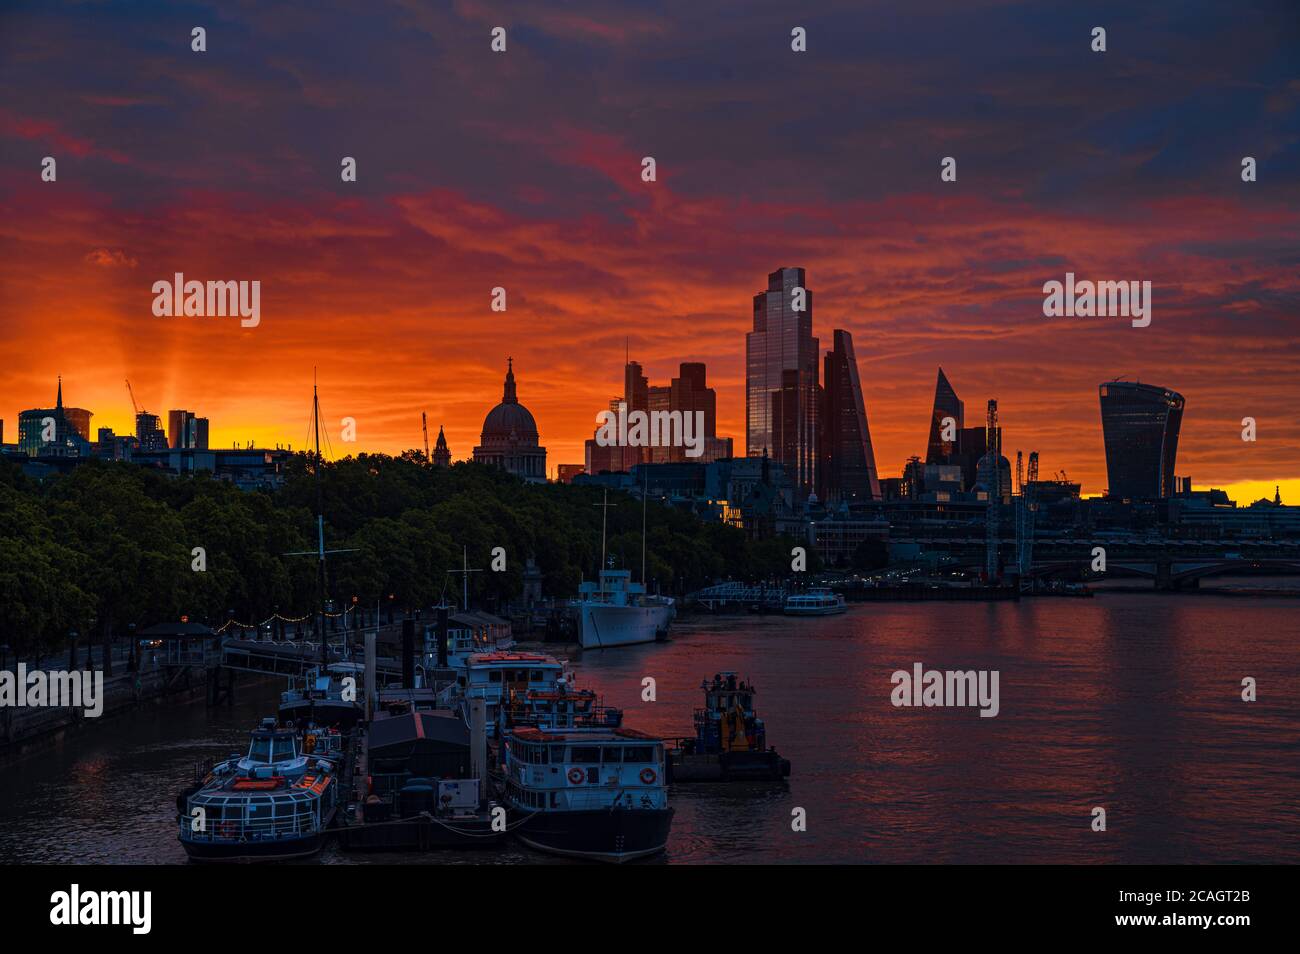 Sunrise in central London, with the sun just appearing, London Stock Photo